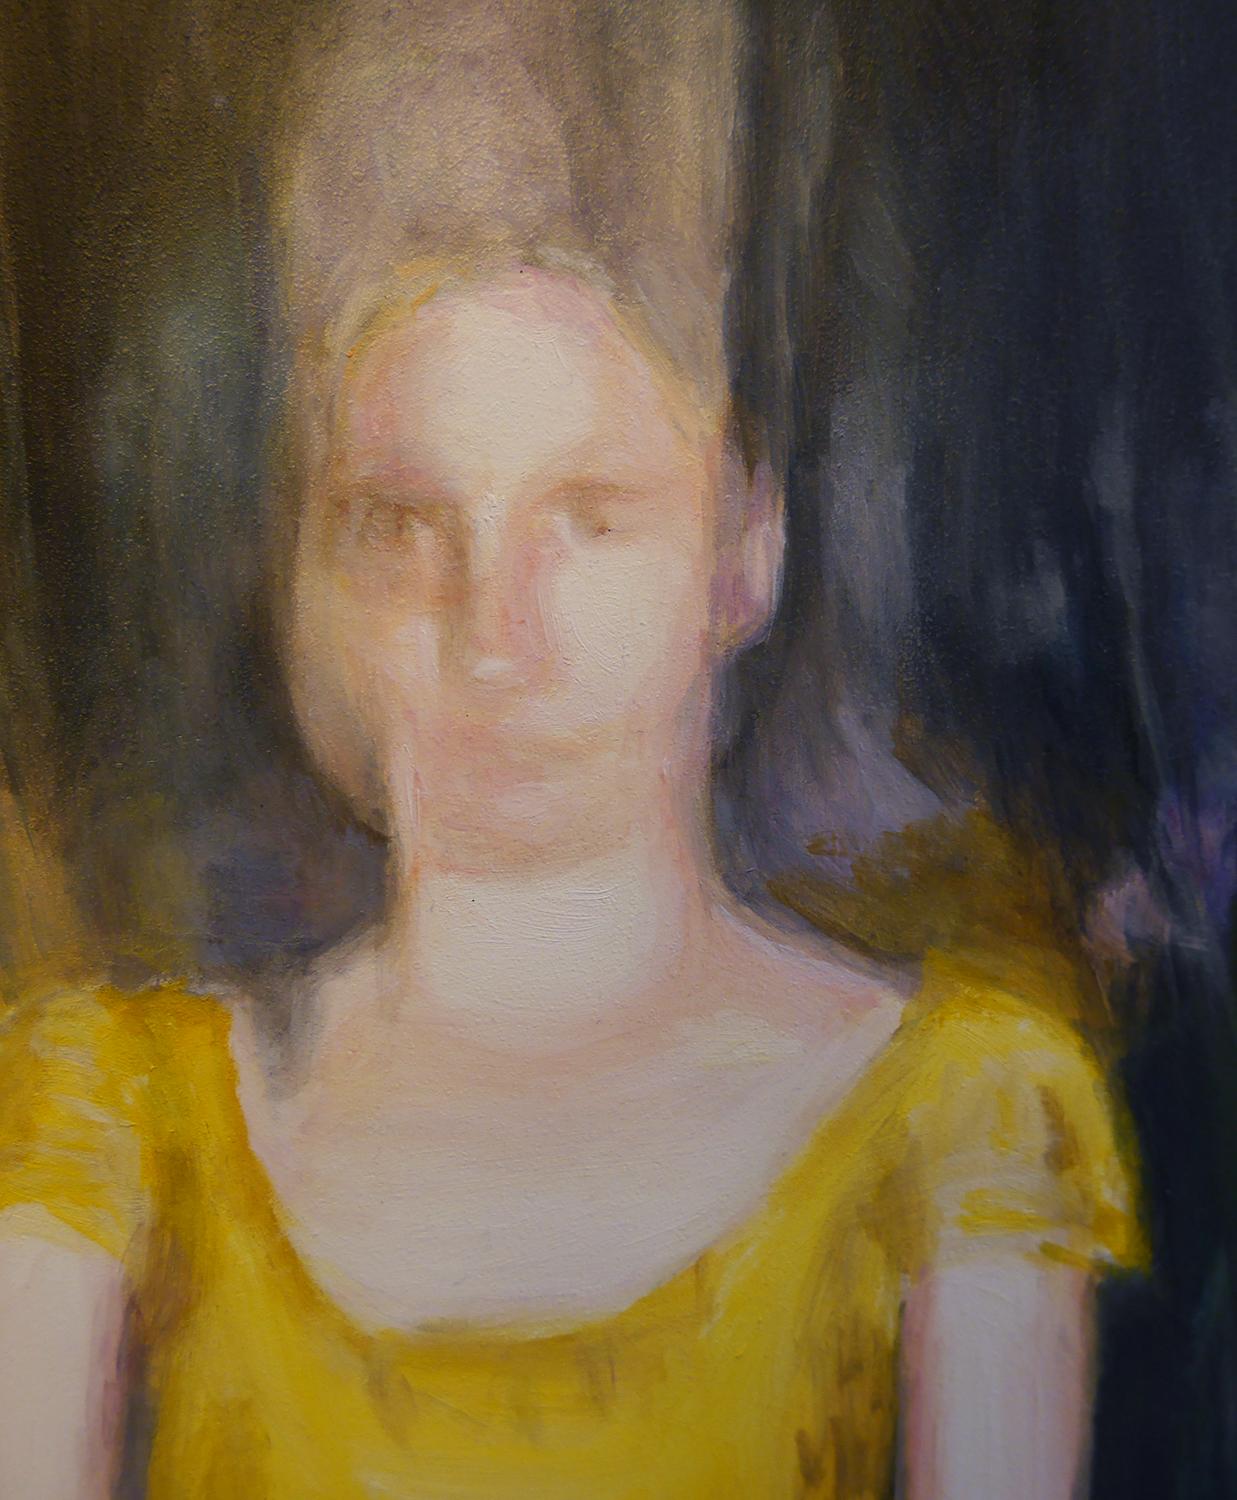 <p>Artist Comments<br />A woman in a yellow dress evokes feelings of nostalgia and mystery in this ethereal glimpse of a moment in time. The frozen stance and careful gaze of the almost ghostly figure arouses ambiguity and questions about the nature